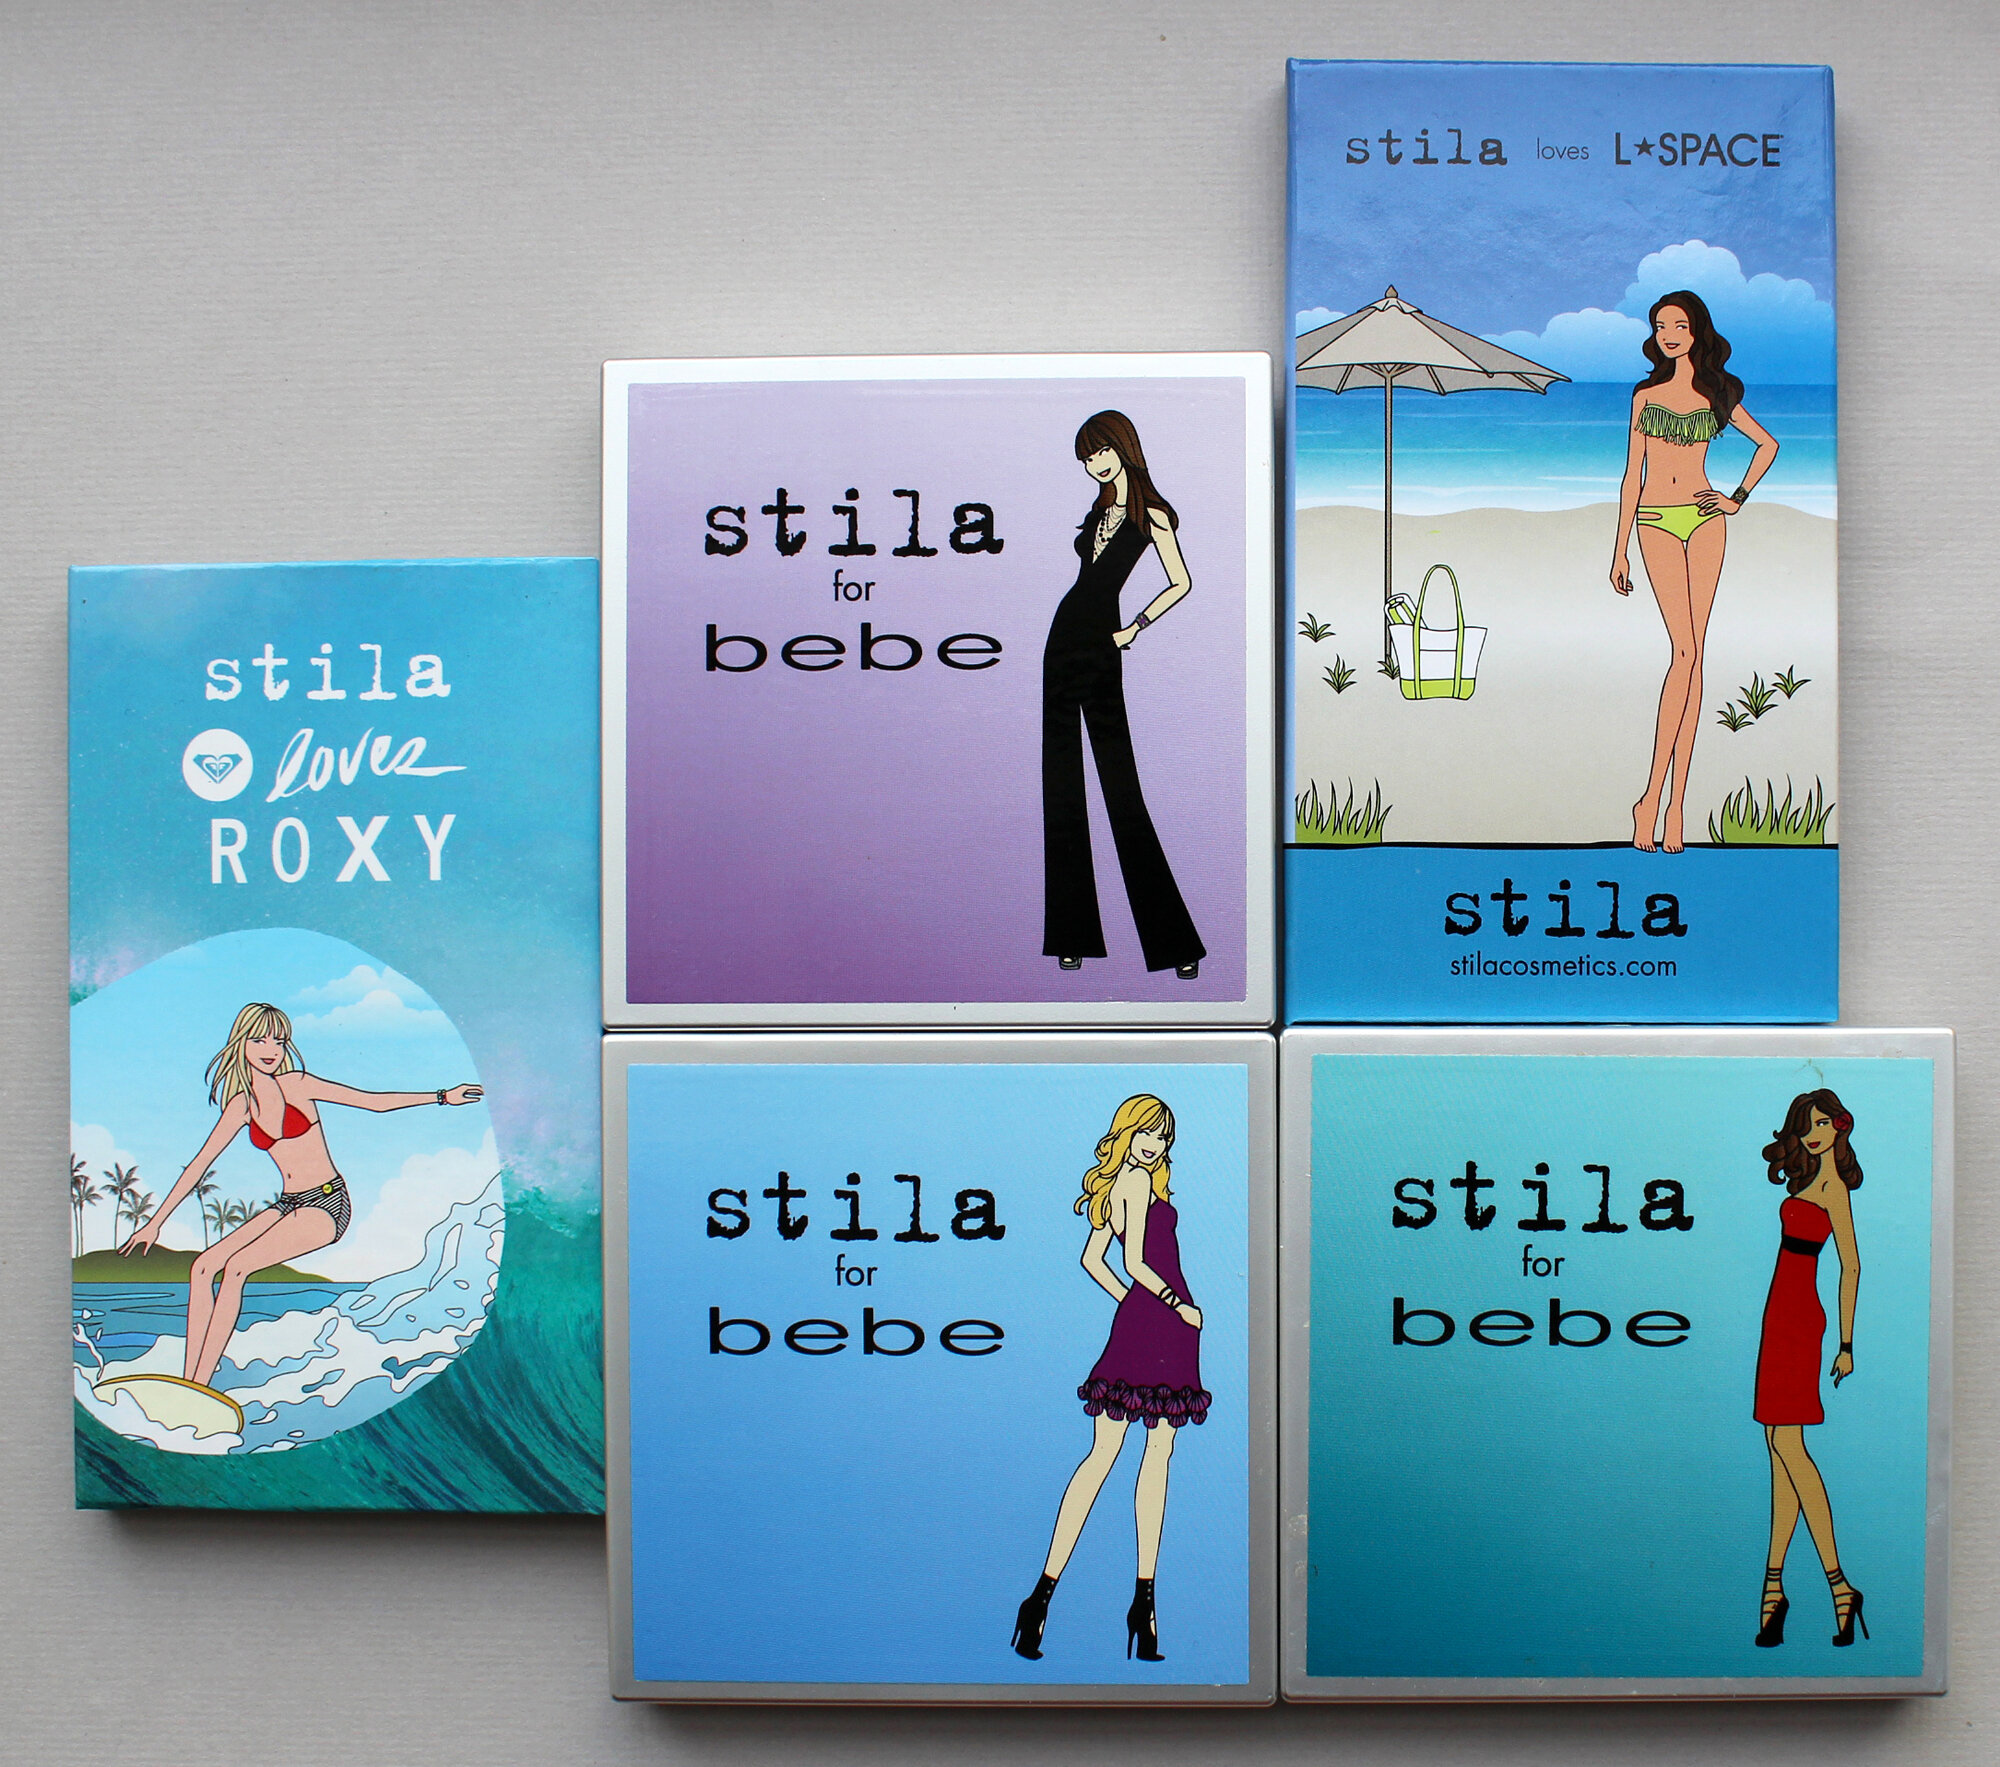   Roxy, L-Space and Bebe Palettes  2011 (Roxy), 2013 (L-Space) 2008 (Bebe)  Starting around 2008, Stila began partnering with affordable clothing and accessory lines in addition to movie tie-ins.   